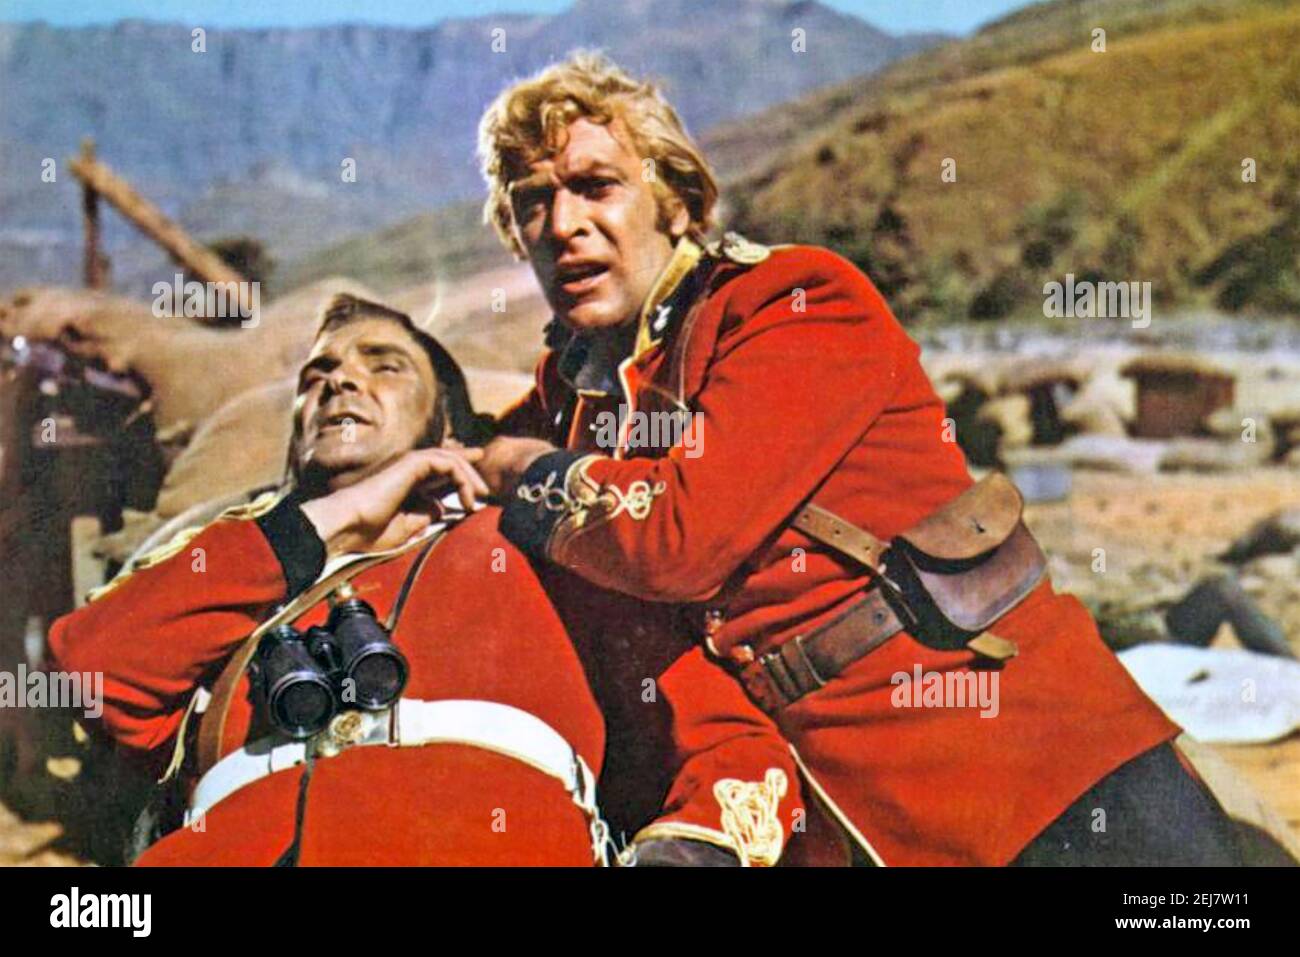 ZULU 1964 Paramount/Embassy film with Michael Caine at right as Bromhead and Stanley Baker as Chard Stock Photo